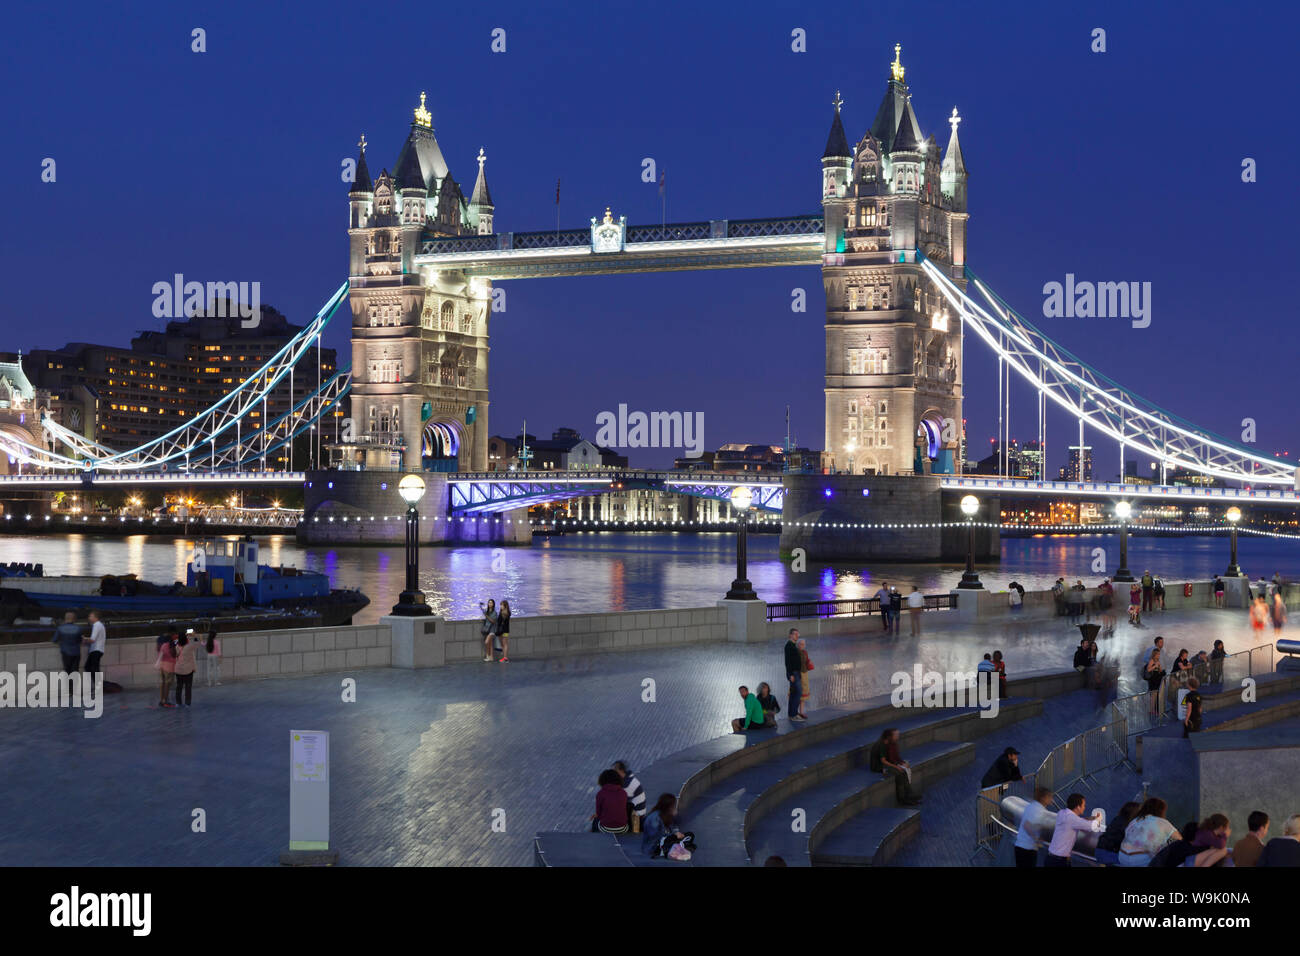 Tourists in front of City Hall, River Thames and Tower Bridge, London, England, United Kingdom, Europe Stock Photo